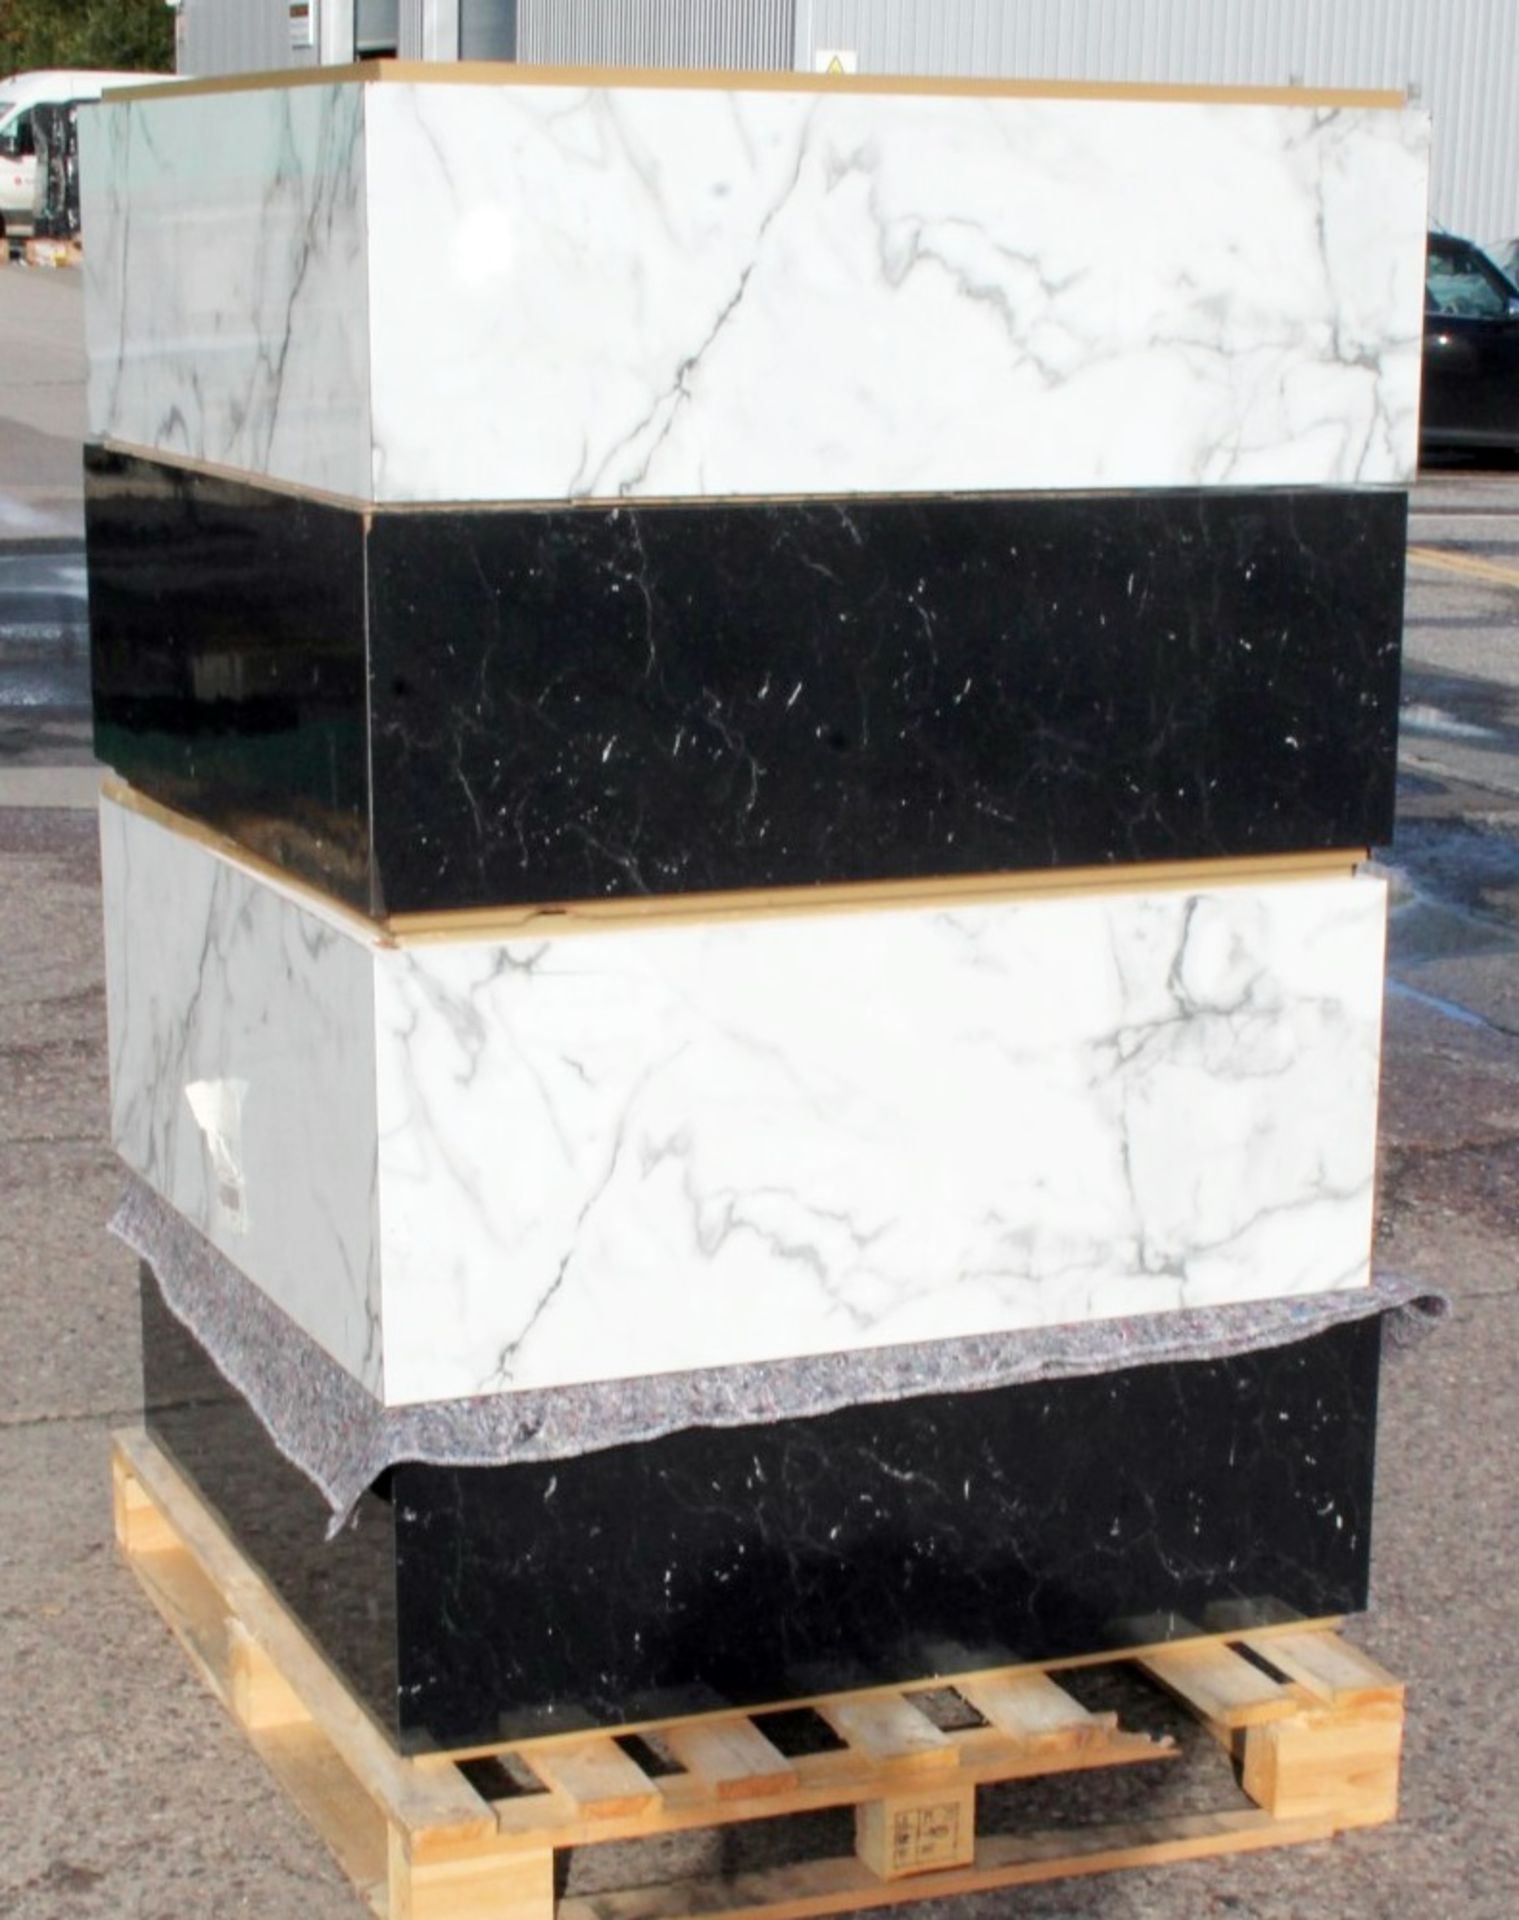 4 x Assorted 1-Metre Wide Wooden Retail Plinth Platforms, All With A Marble-effect Aesthetic